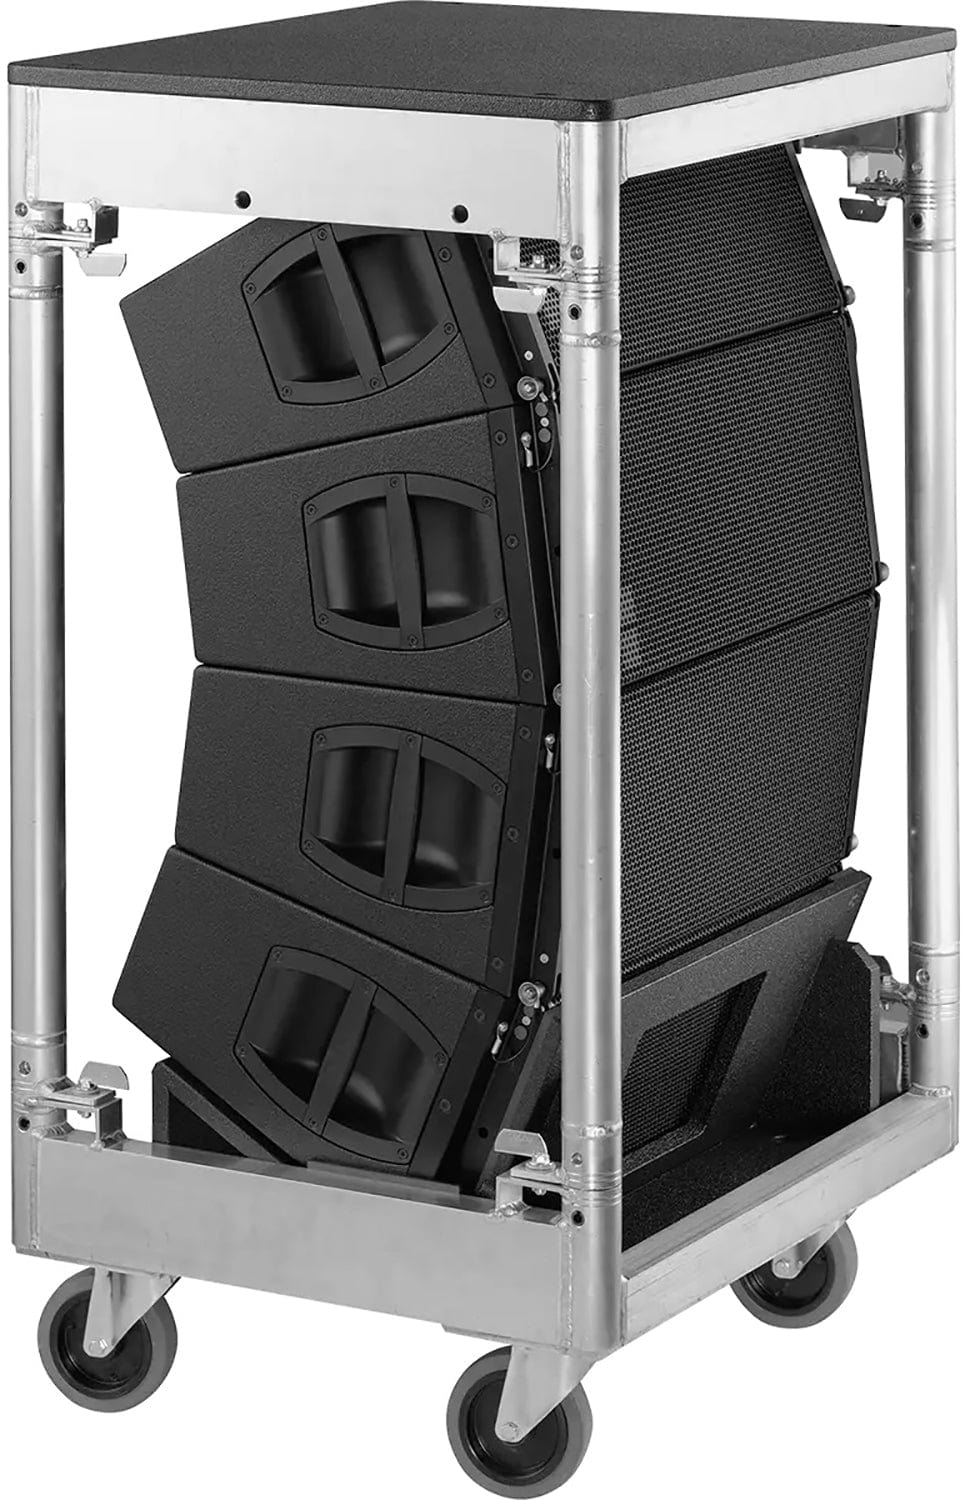 D&B Audiotechnik Z0708.002 Y12 Loudspeaker with NLT4 F/M Connections - PSSL ProSound and Stage Lighting